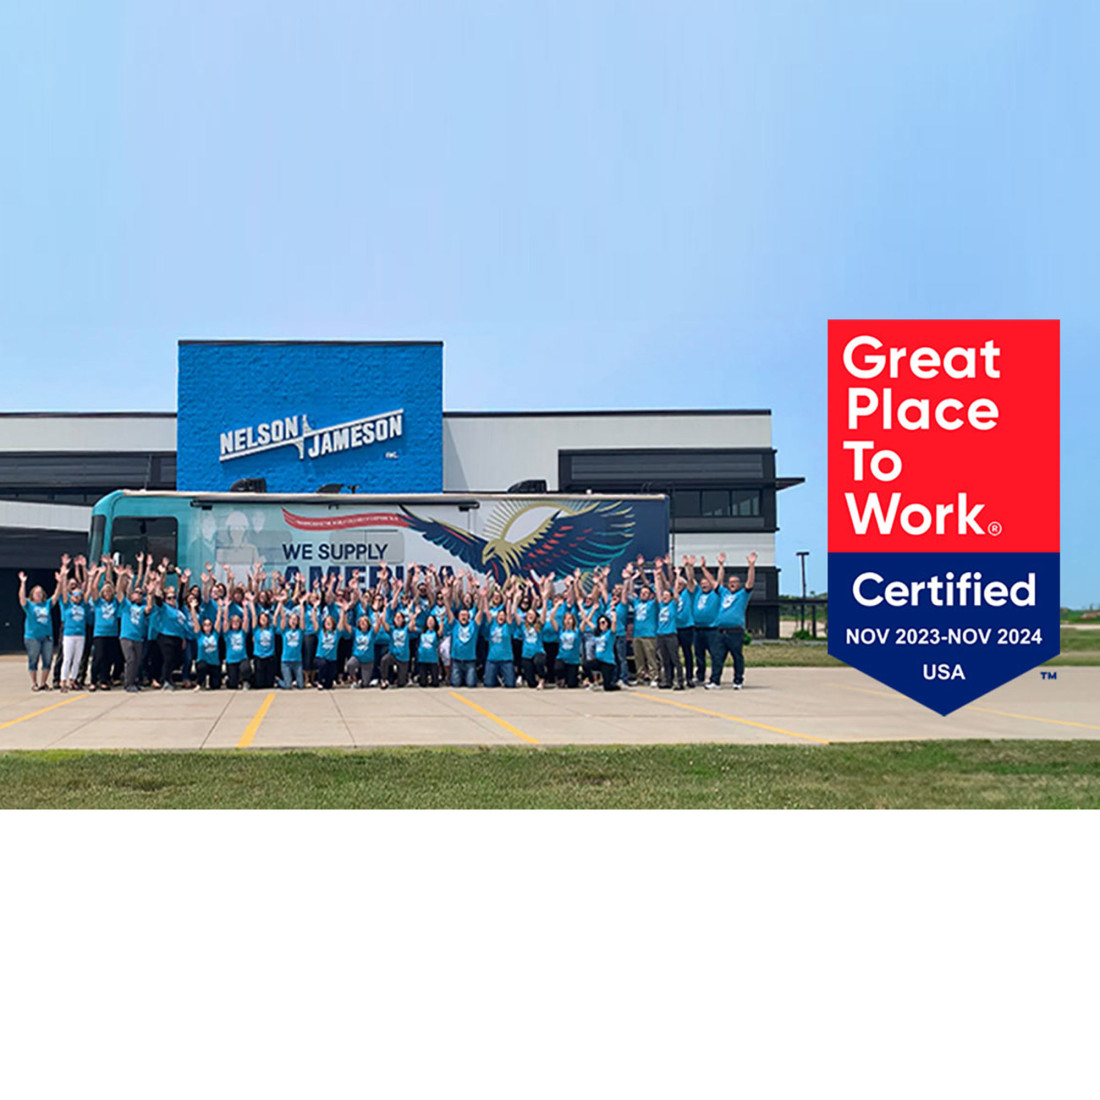 Nelson-Jameson Receives Great Place to Work Certification